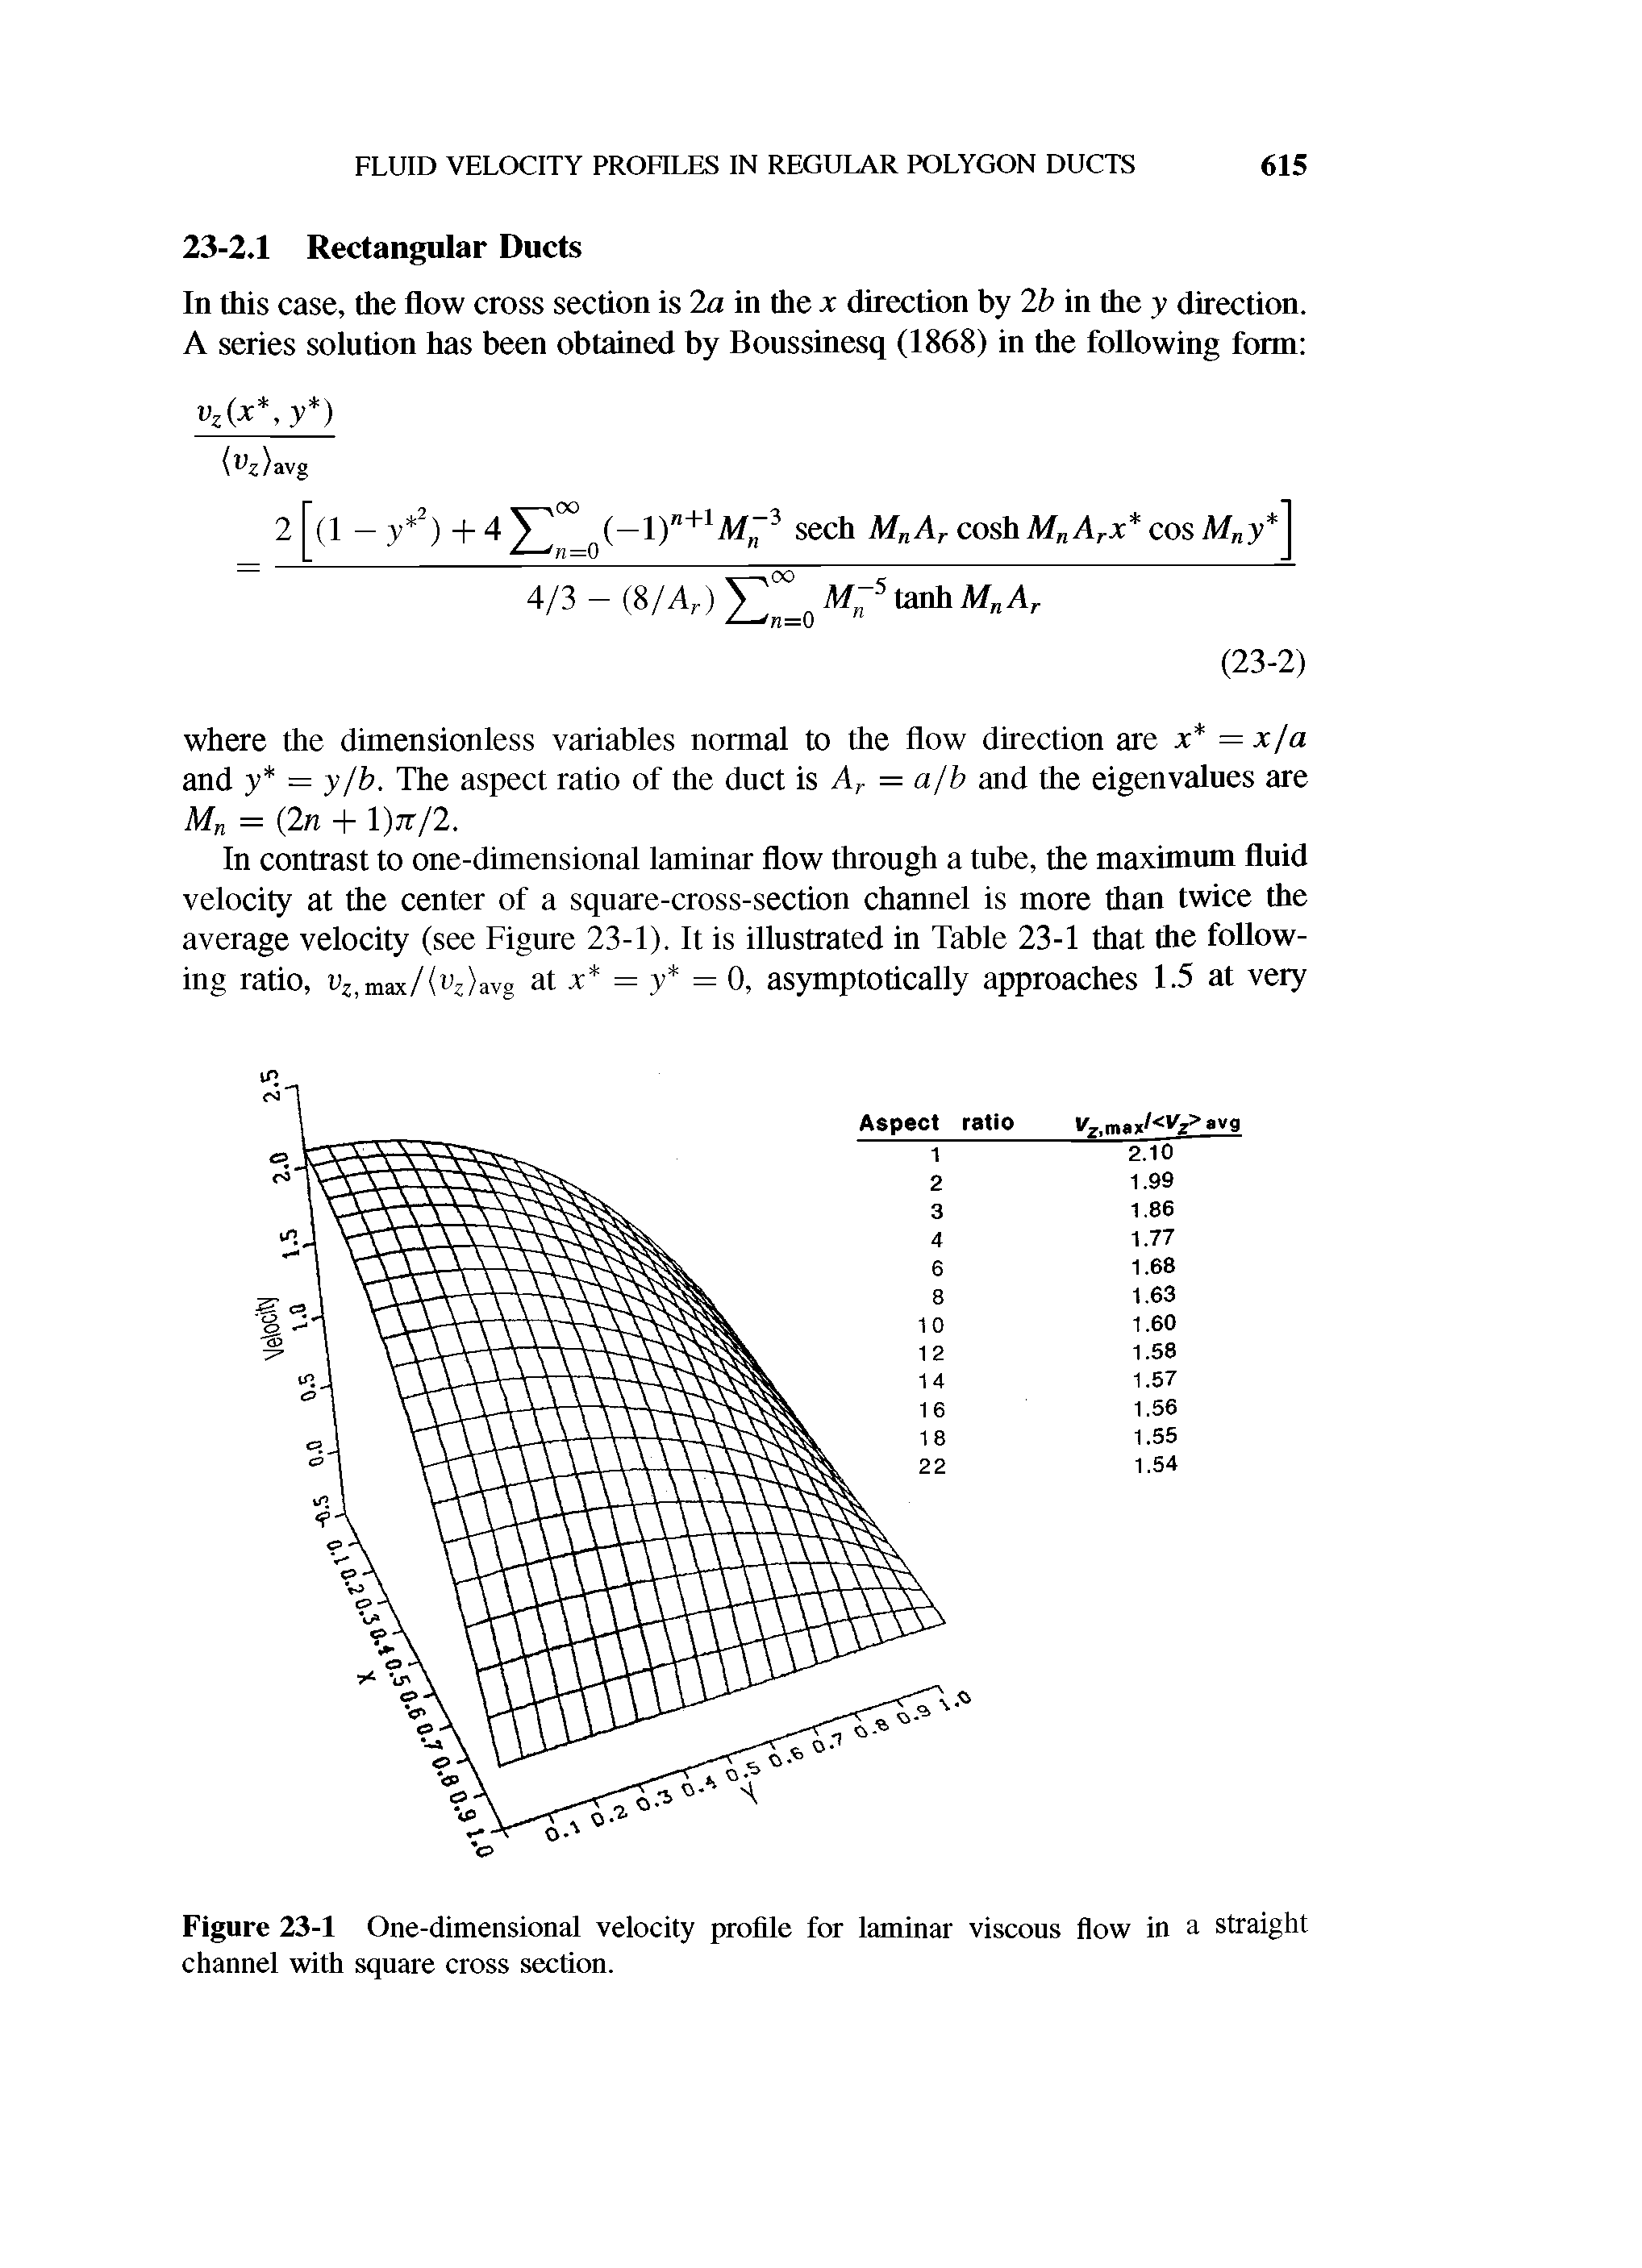 Figure 23-1 One-dimensional velocity profile for laminar viscous flow in a straight channel with square cross section.